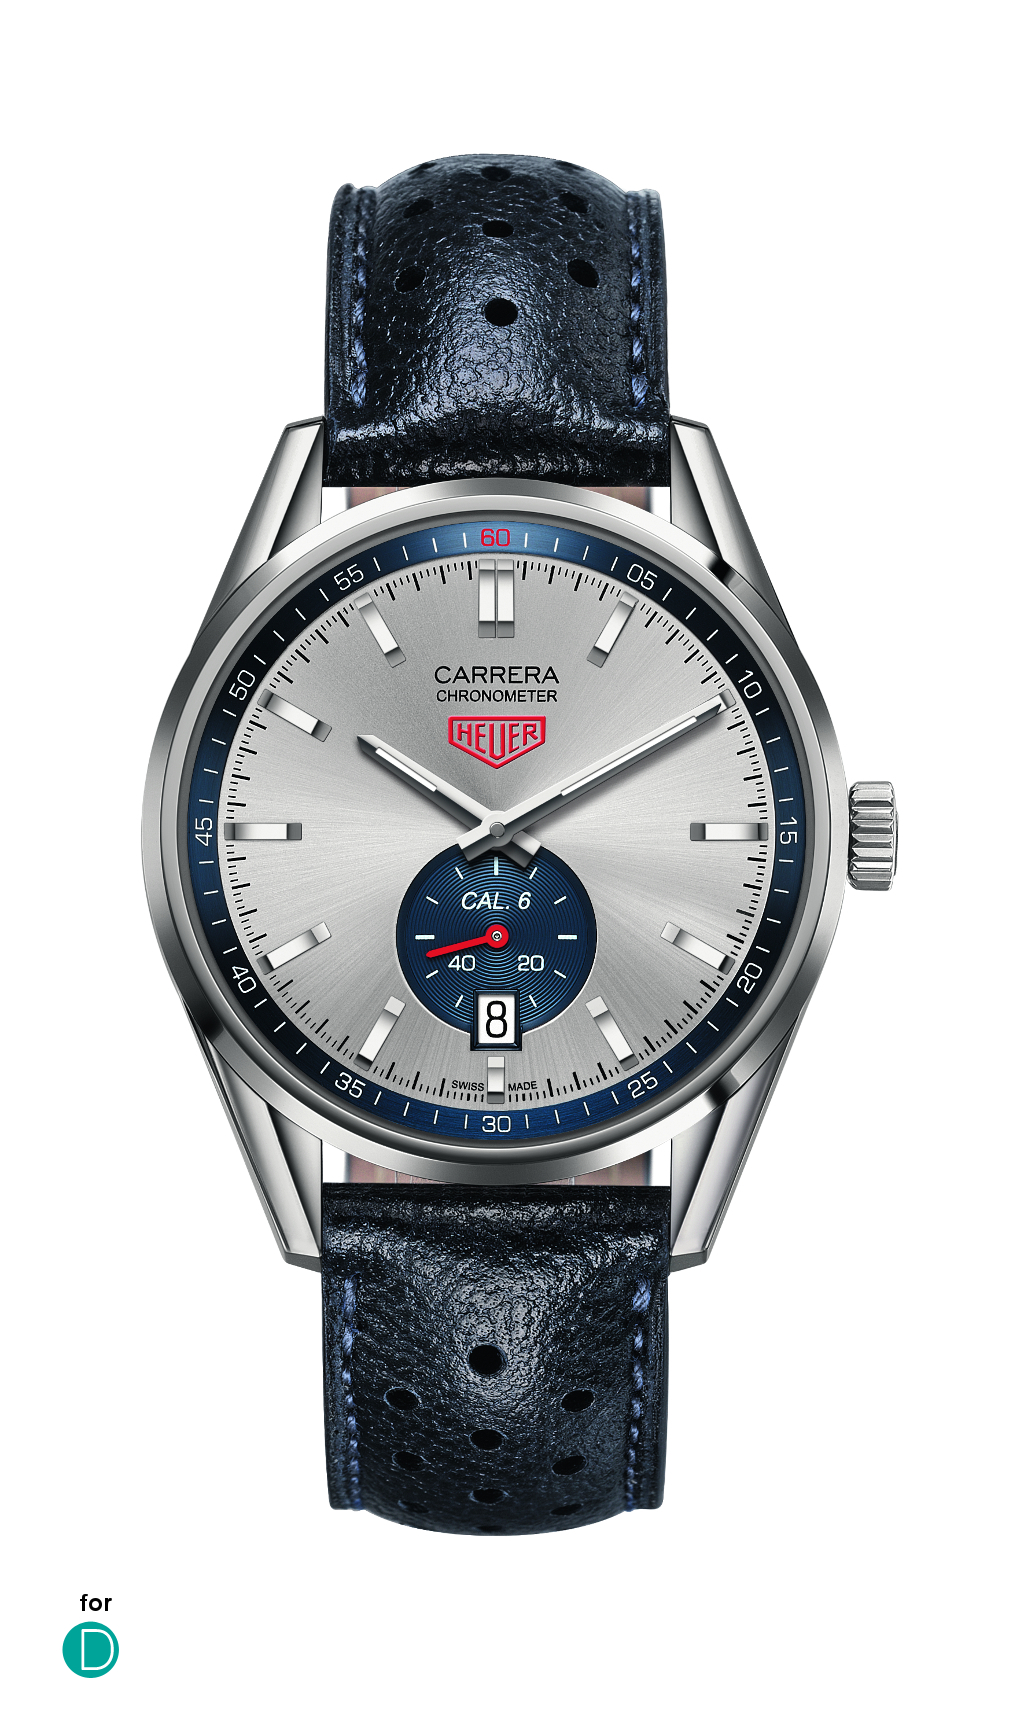 The Tag Heuer Carrera 6,  featuring a COSC-certified movement and a date display at 6 o'clock. 